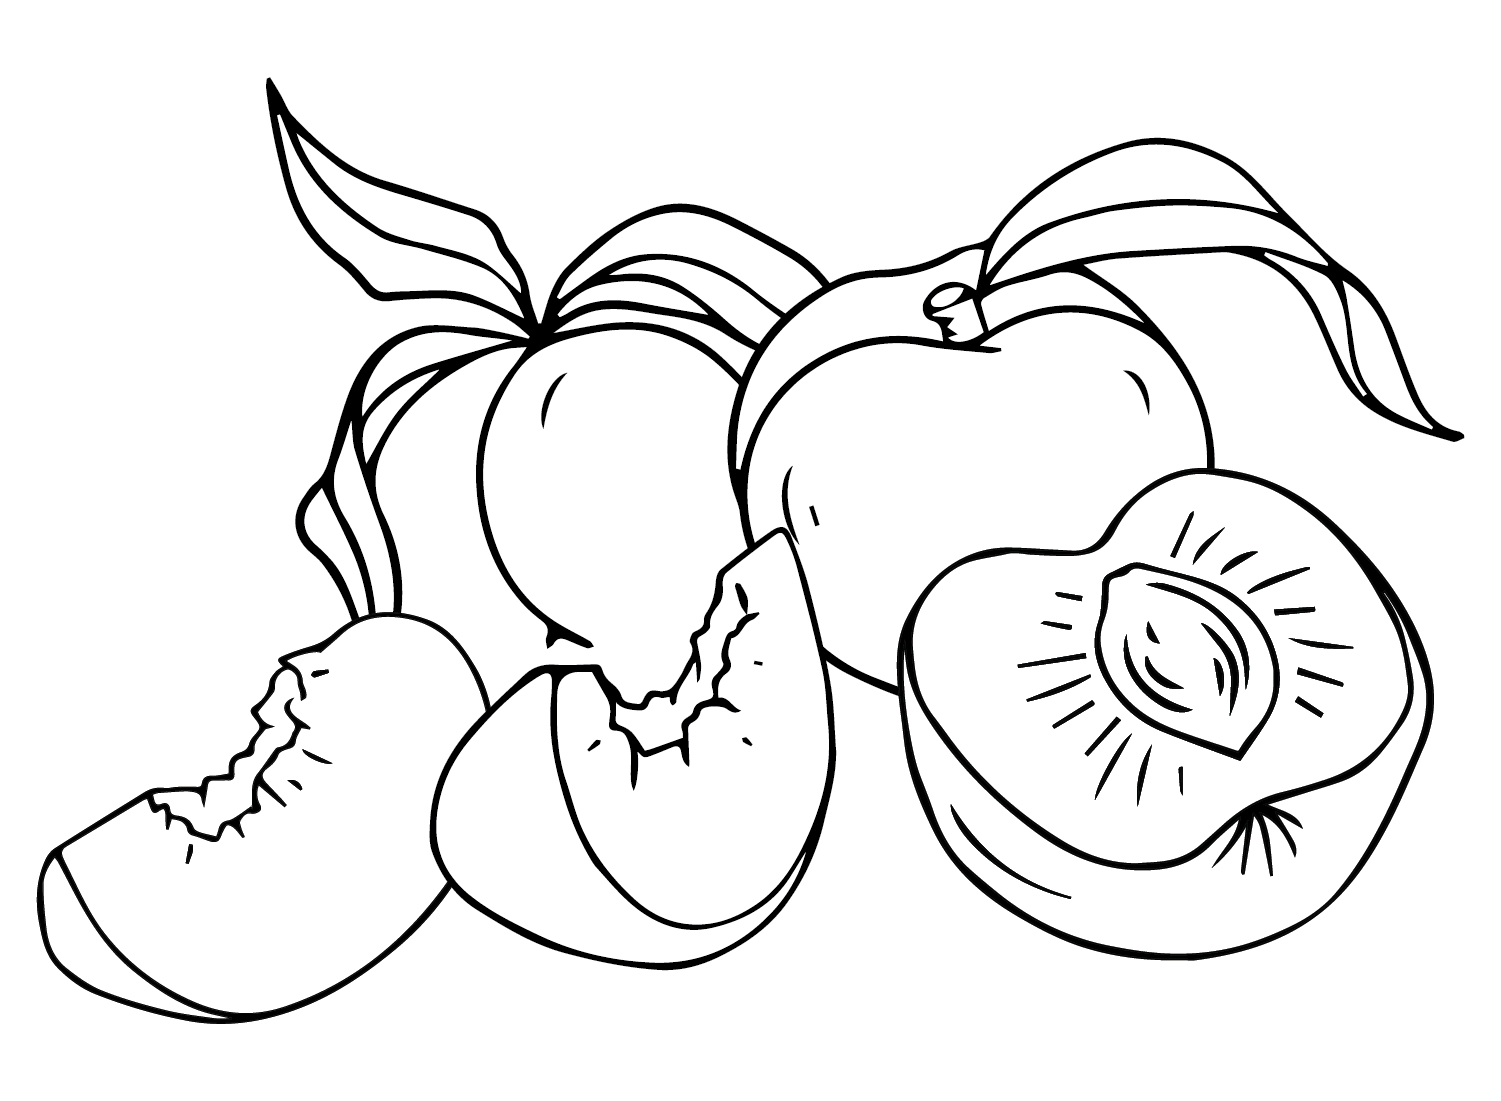 Nectarines Fruit Coloring Page